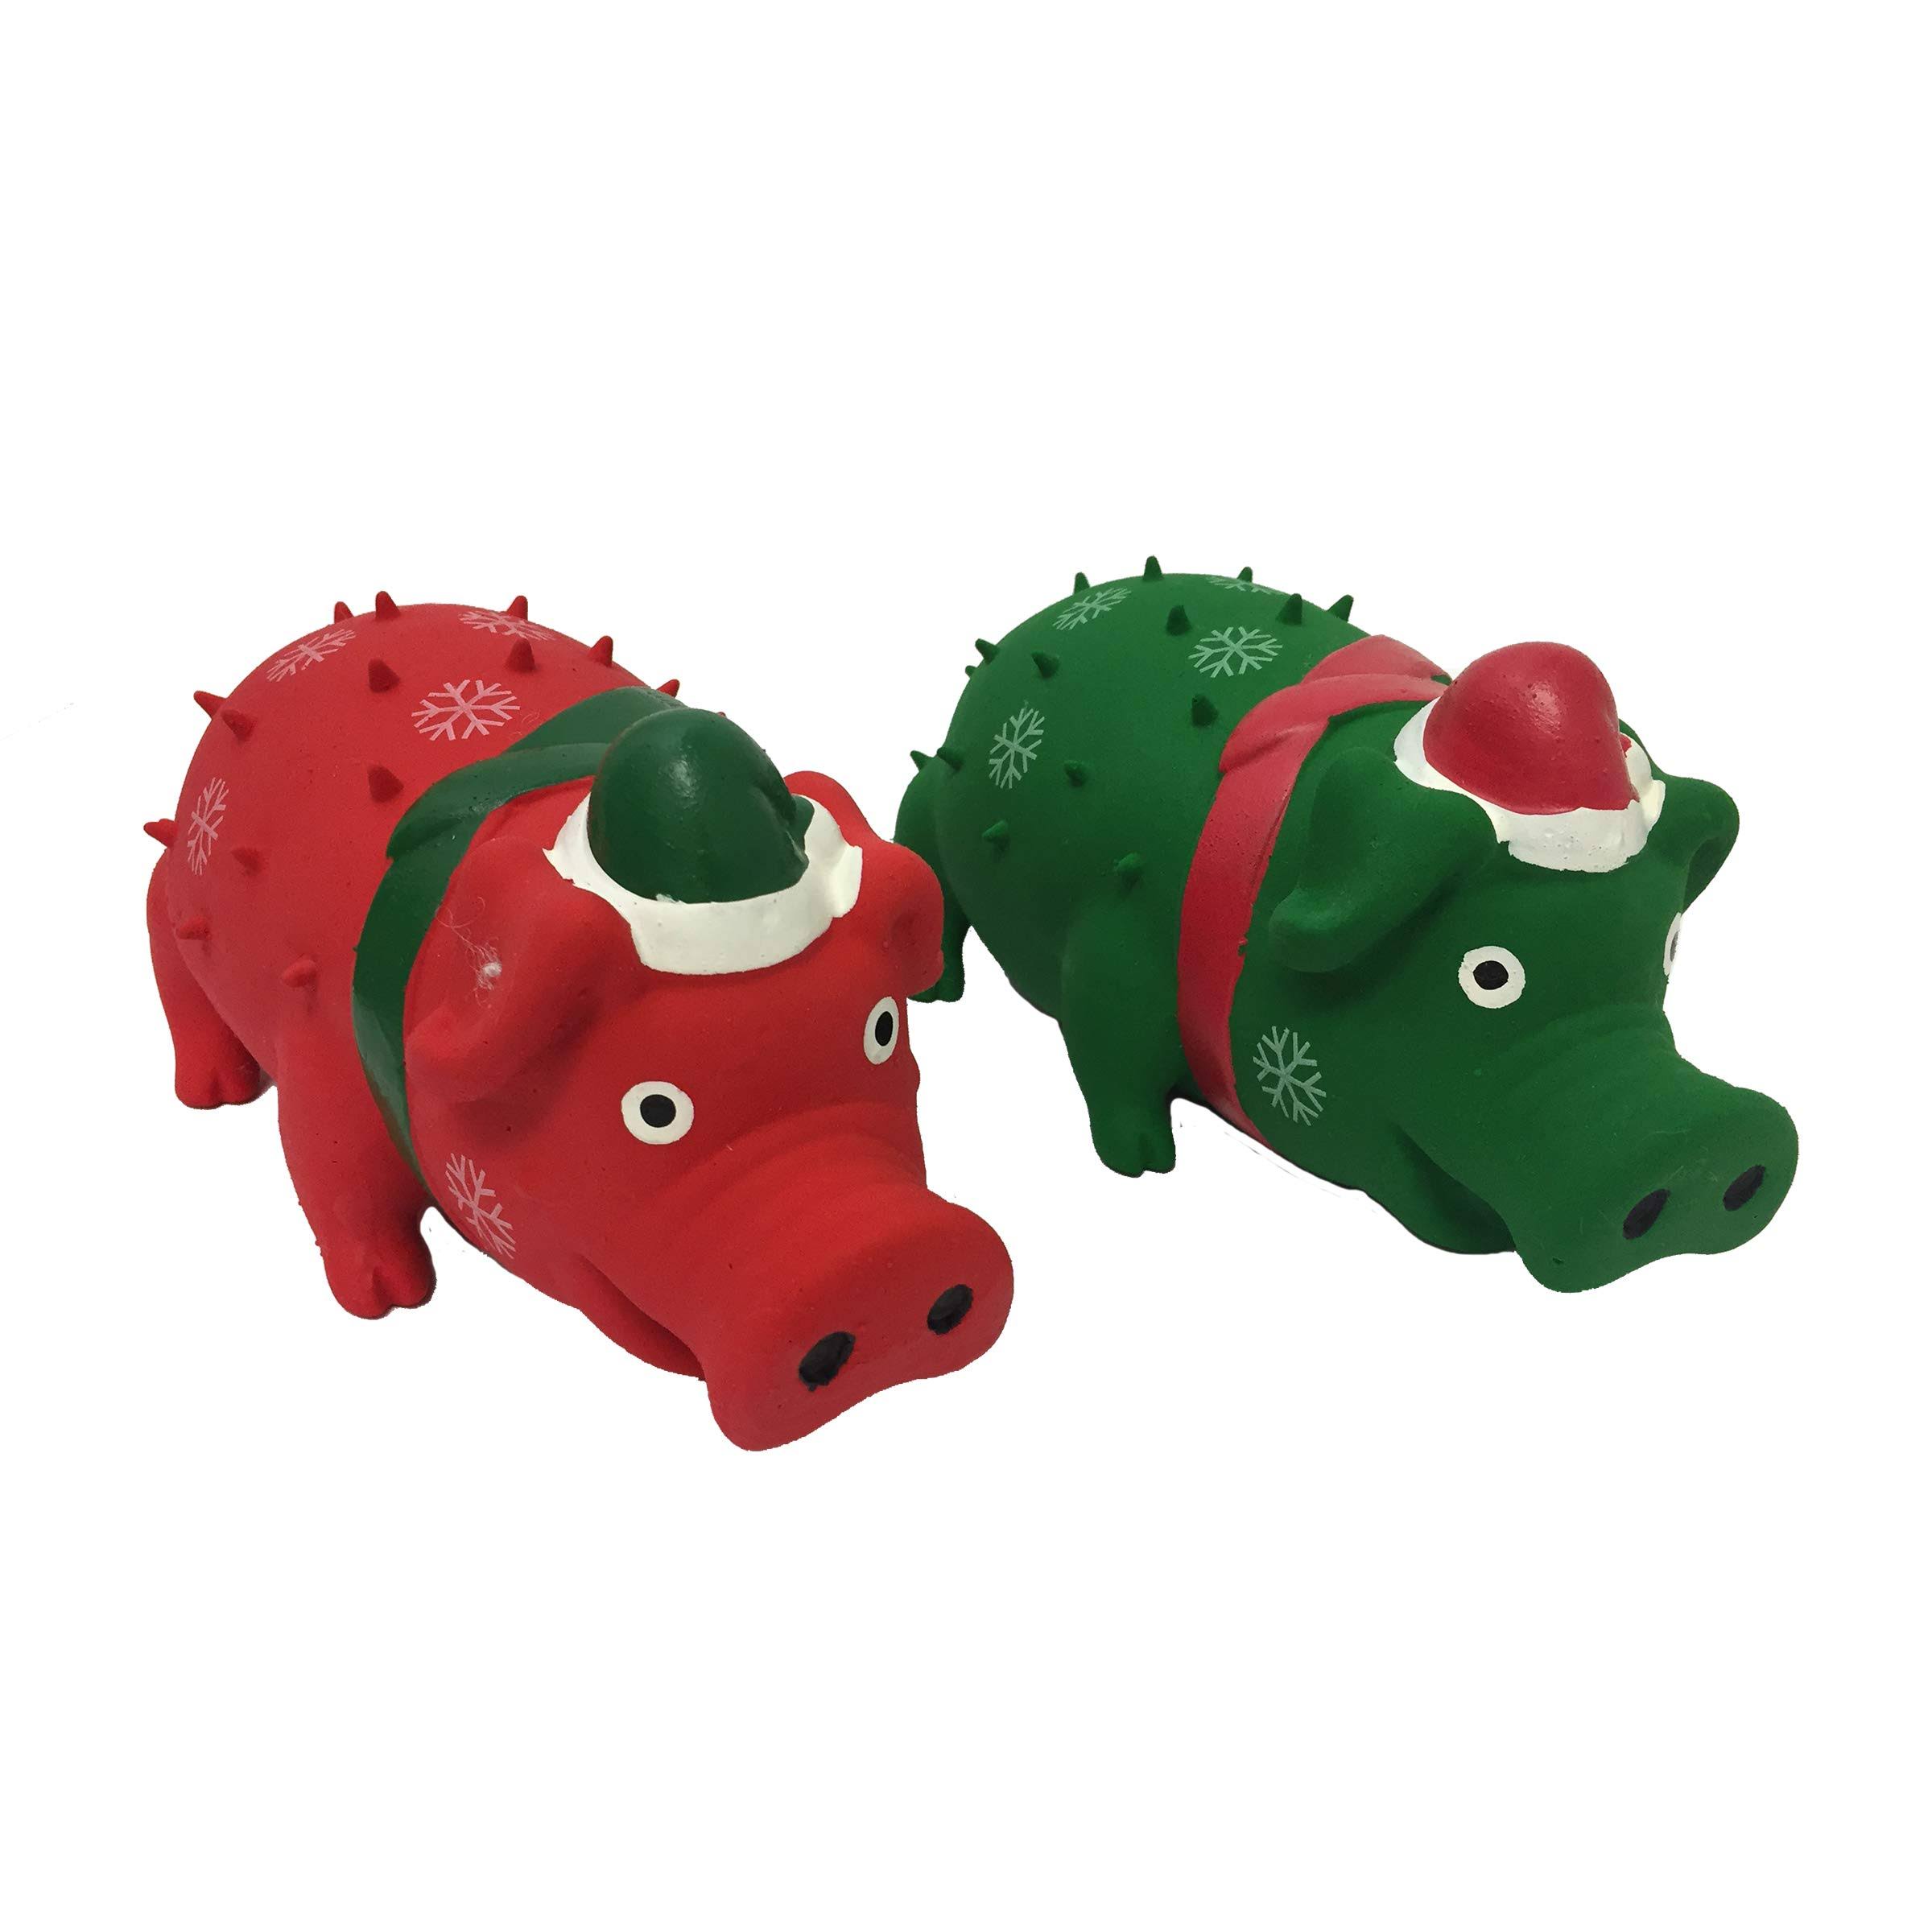 Multipet Holiday Globlets Toy - 8", Assorted Colors